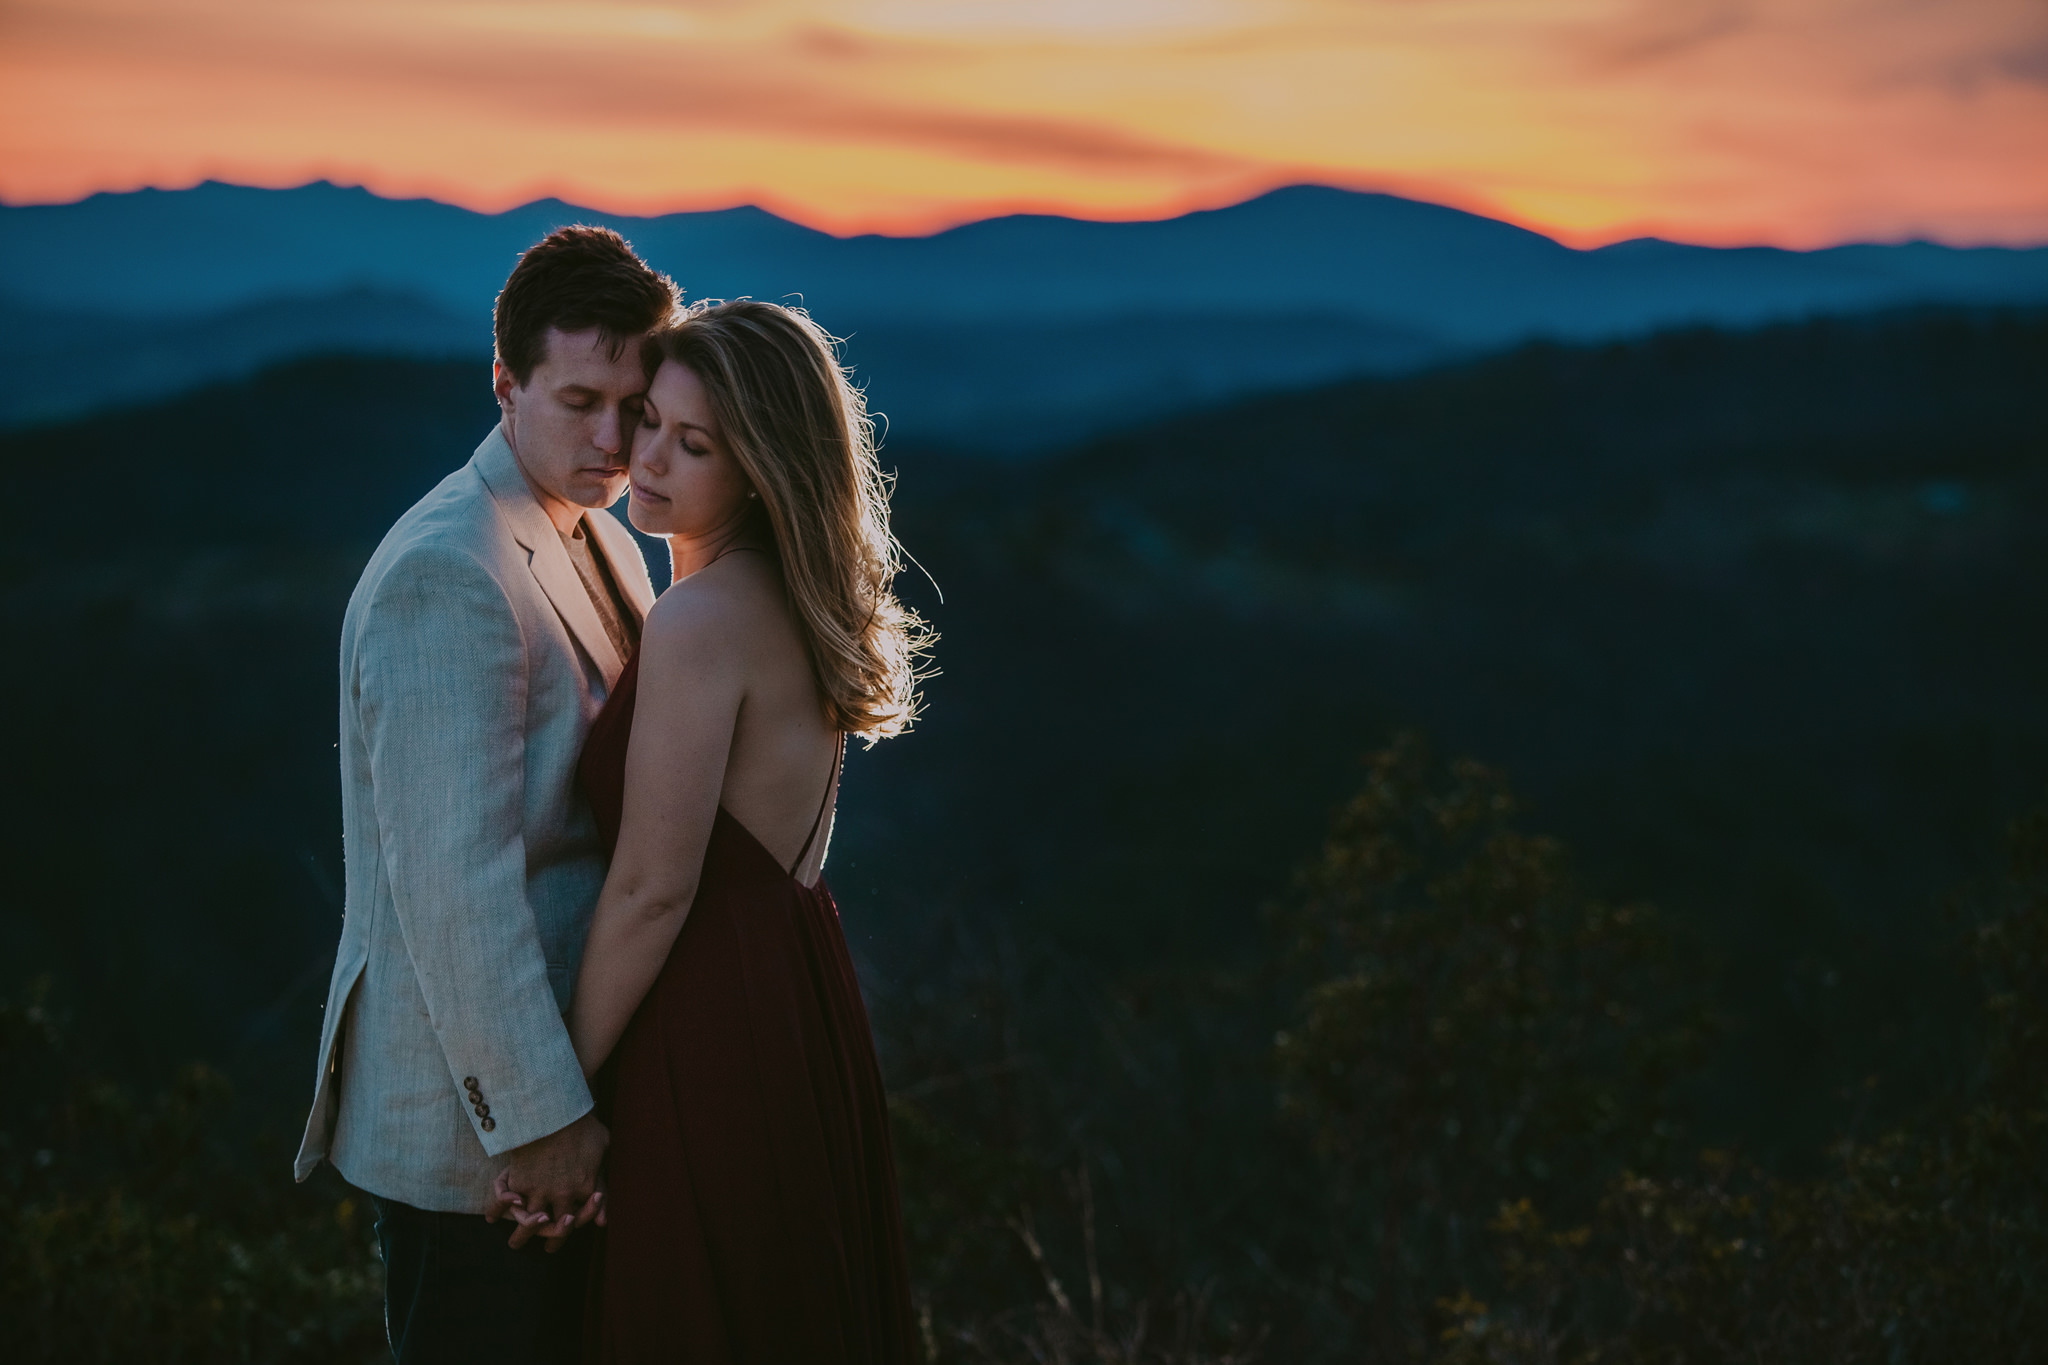 One last embrace at Doughton Park overlooking the Blue Ridge Parkway in North Carolina during a beautiful anniversary session by Mabyn Ludke Photography.